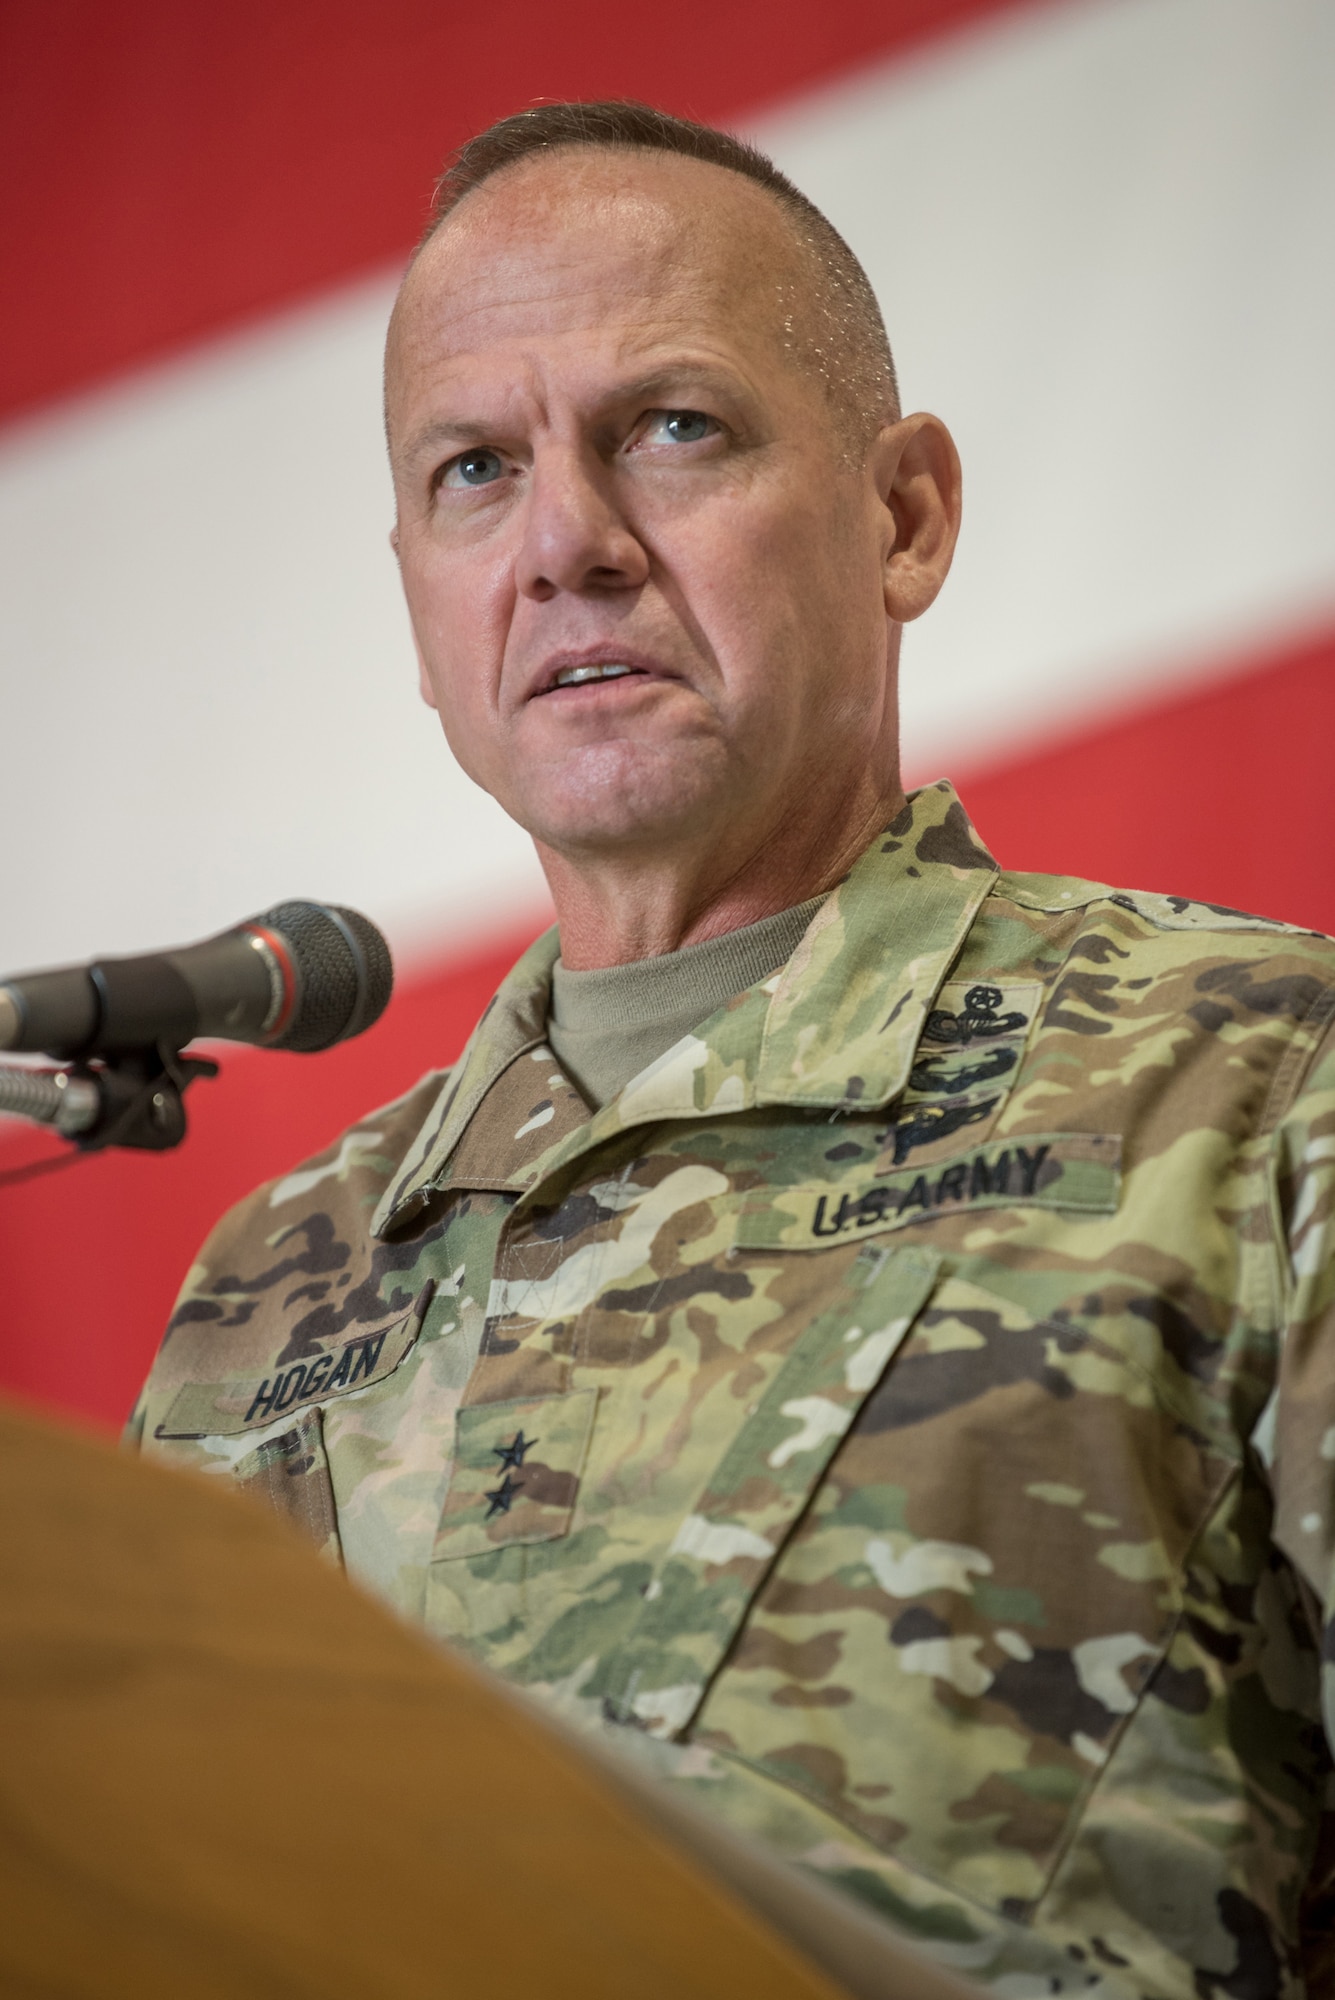 U.S. Army Maj. Gen. Stephen Hogan, Kentucky’s adjutant general, speaks at a transfer-of-responsibility ceremony at the Kentucky Air National Guard Base in Louisville, Ky., Aug. 11, 2019. Brig. Gen. Jeffrey Wilkinson assumed command of the Kentucky Air National Guard at the ceremony, replacing Brig. Gen. Warren Hurst, who is stepping down as assistant adjutant general for Air. (U.S. Air National Guard photo by Staff Sgt. Joshua Horton)